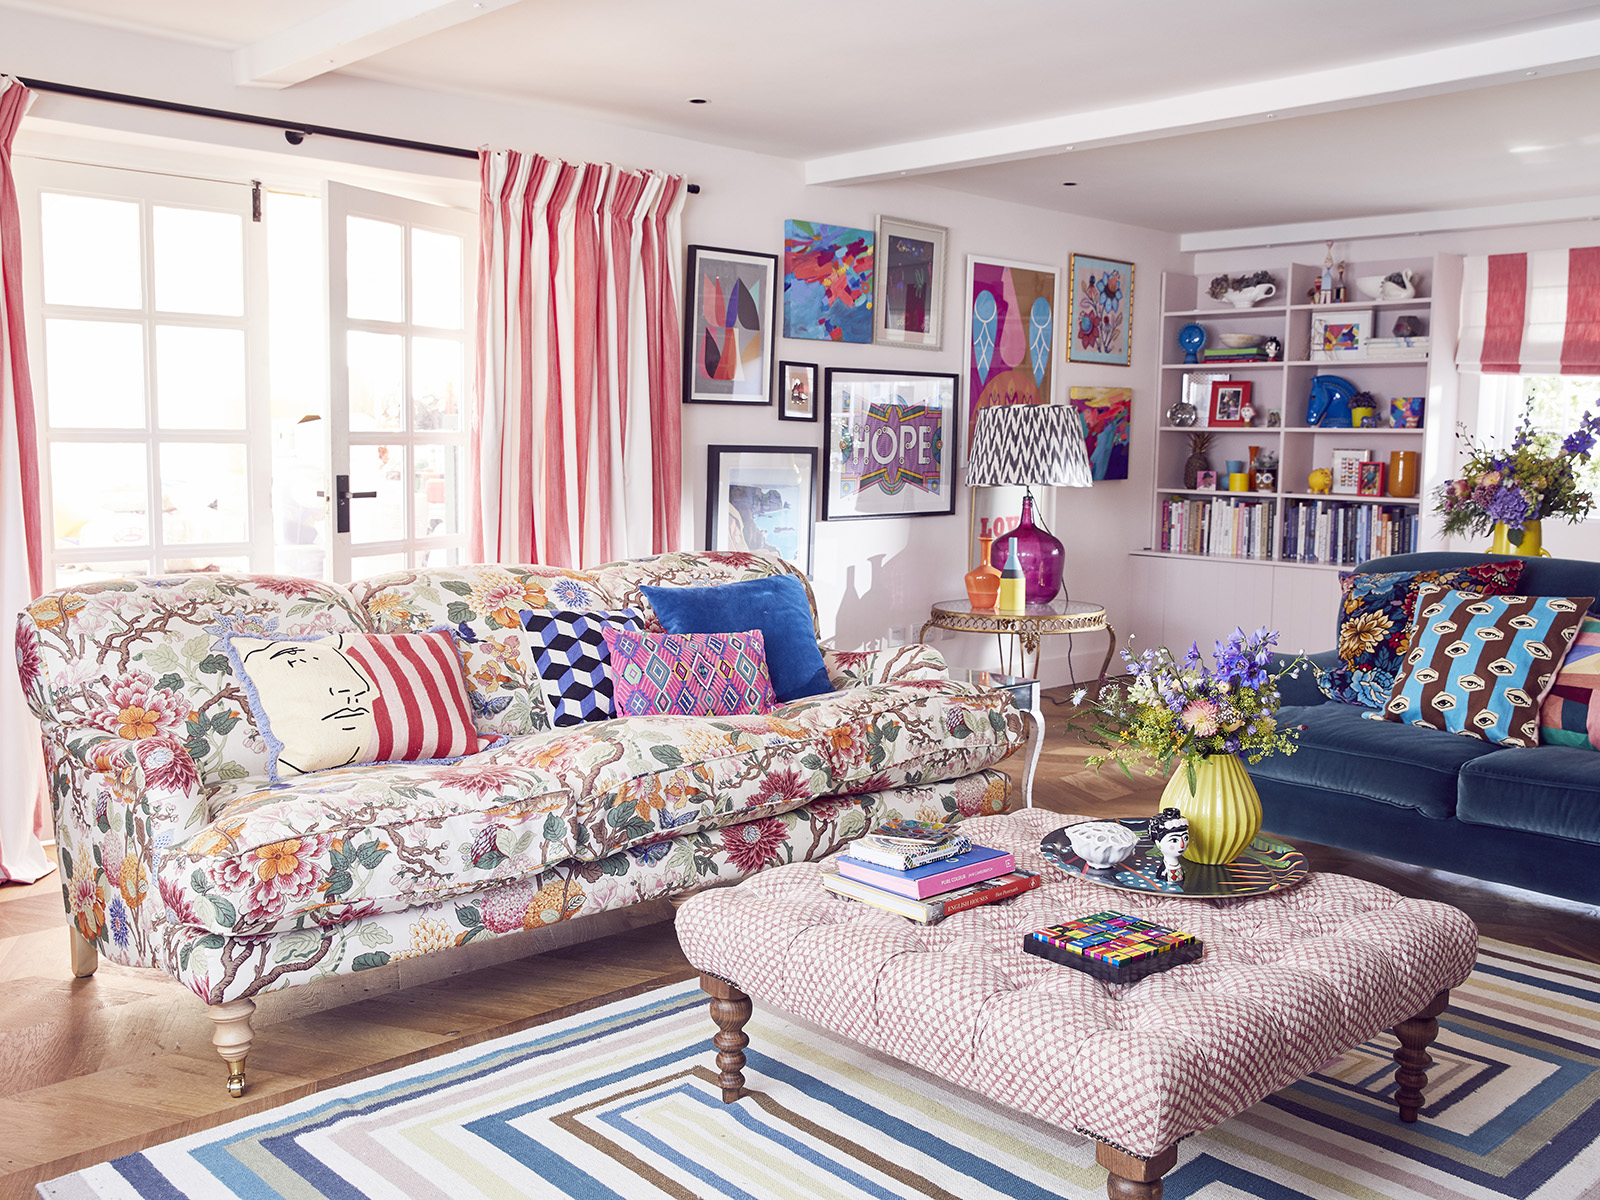 A large bright living room with double doors and red and white striped curtains. A mix of vibrant cushions sit on a floral sofa and dark blue sofa, with a large footstool in front. The walls have a fun gallery wall and bookshelves displaying colourful decorative items. 